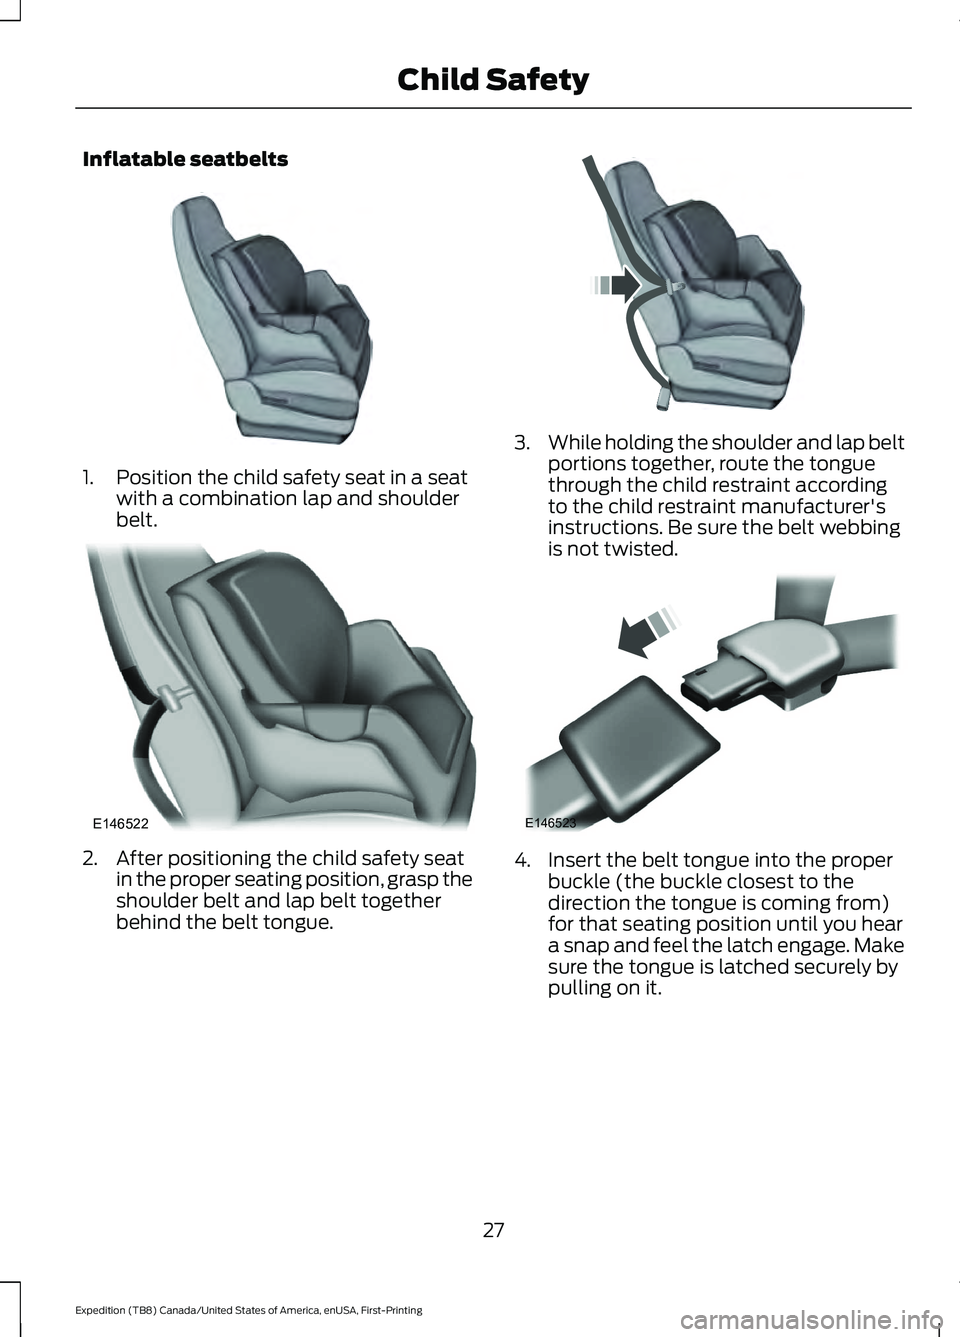 FORD EXPEDITION 2021  Owners Manual Inflatable seatbelts
1. Position the child safety seat in a seat
with a combination lap and shoulder
belt. 2. After positioning the child safety seat
in the proper seating position, grasp the
shoulder